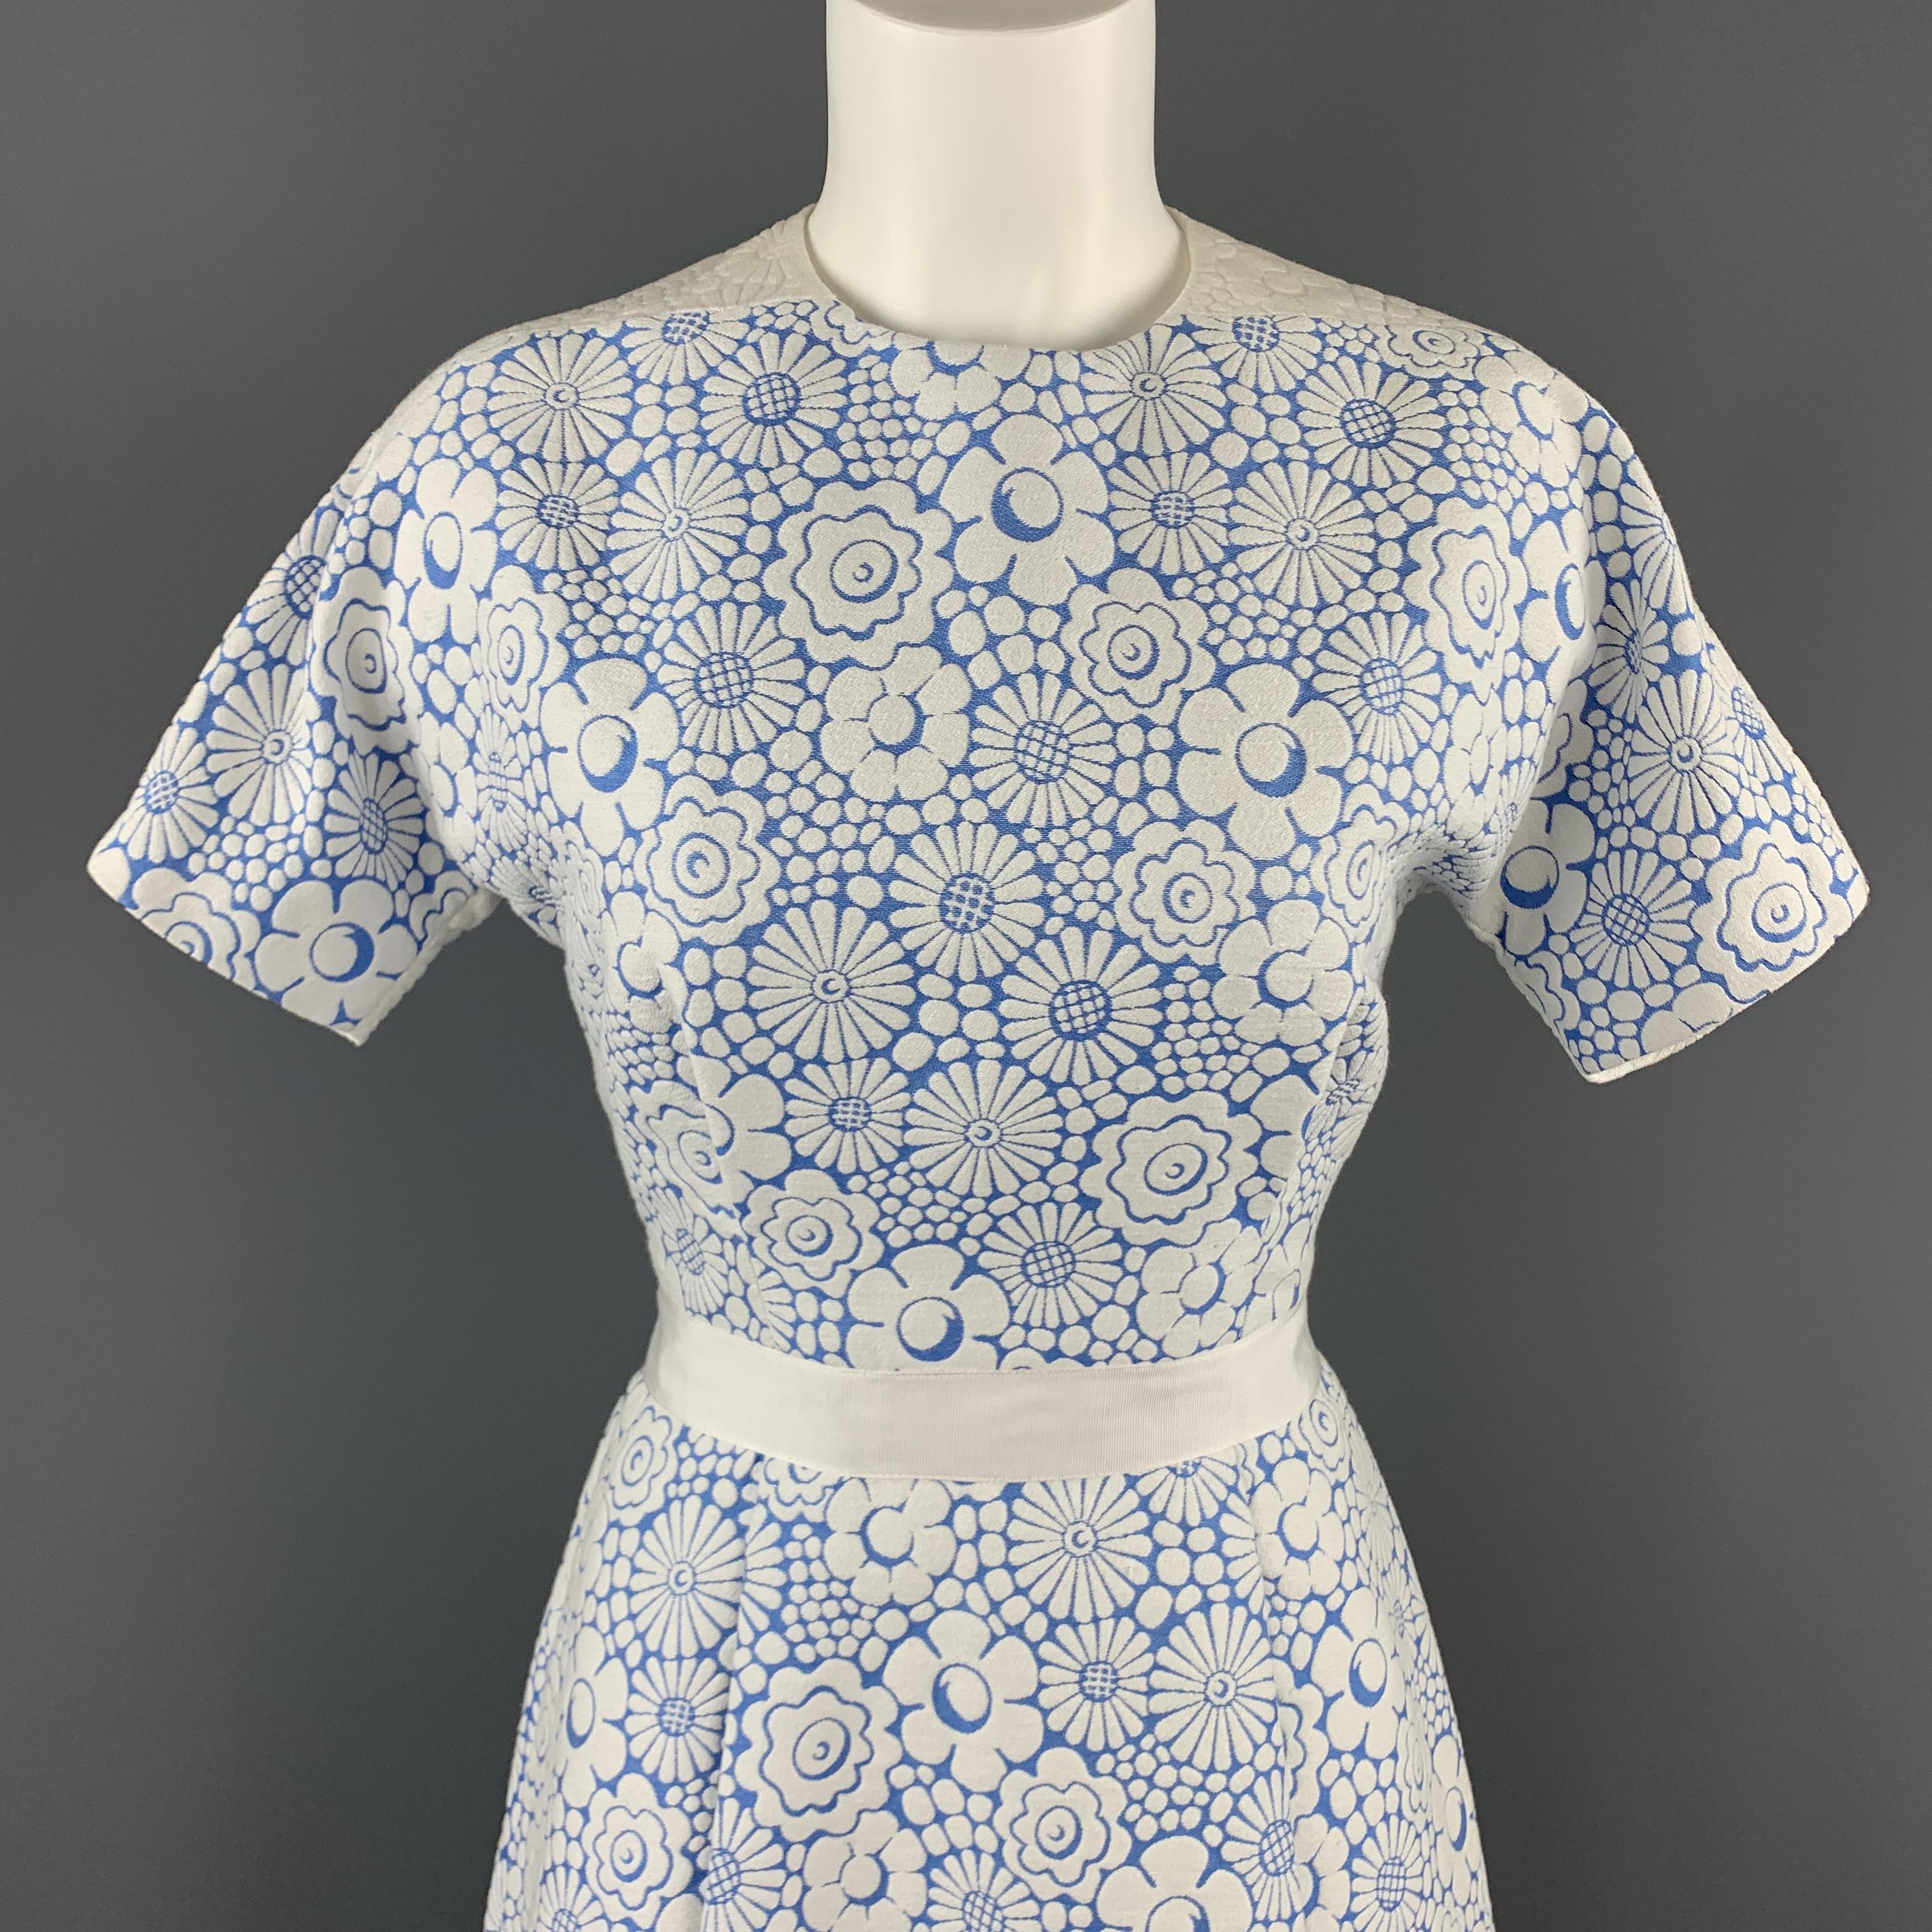 Lovely sheath dress by THOM BROWNE. A nod at a classic 1960's style in a textured floral cotton with structure, featuring a high neckline, short sleeve, ribbon piping, and pleated bodice and skirt with A-line shape. Made in USA.

Excellent Pre-Owned